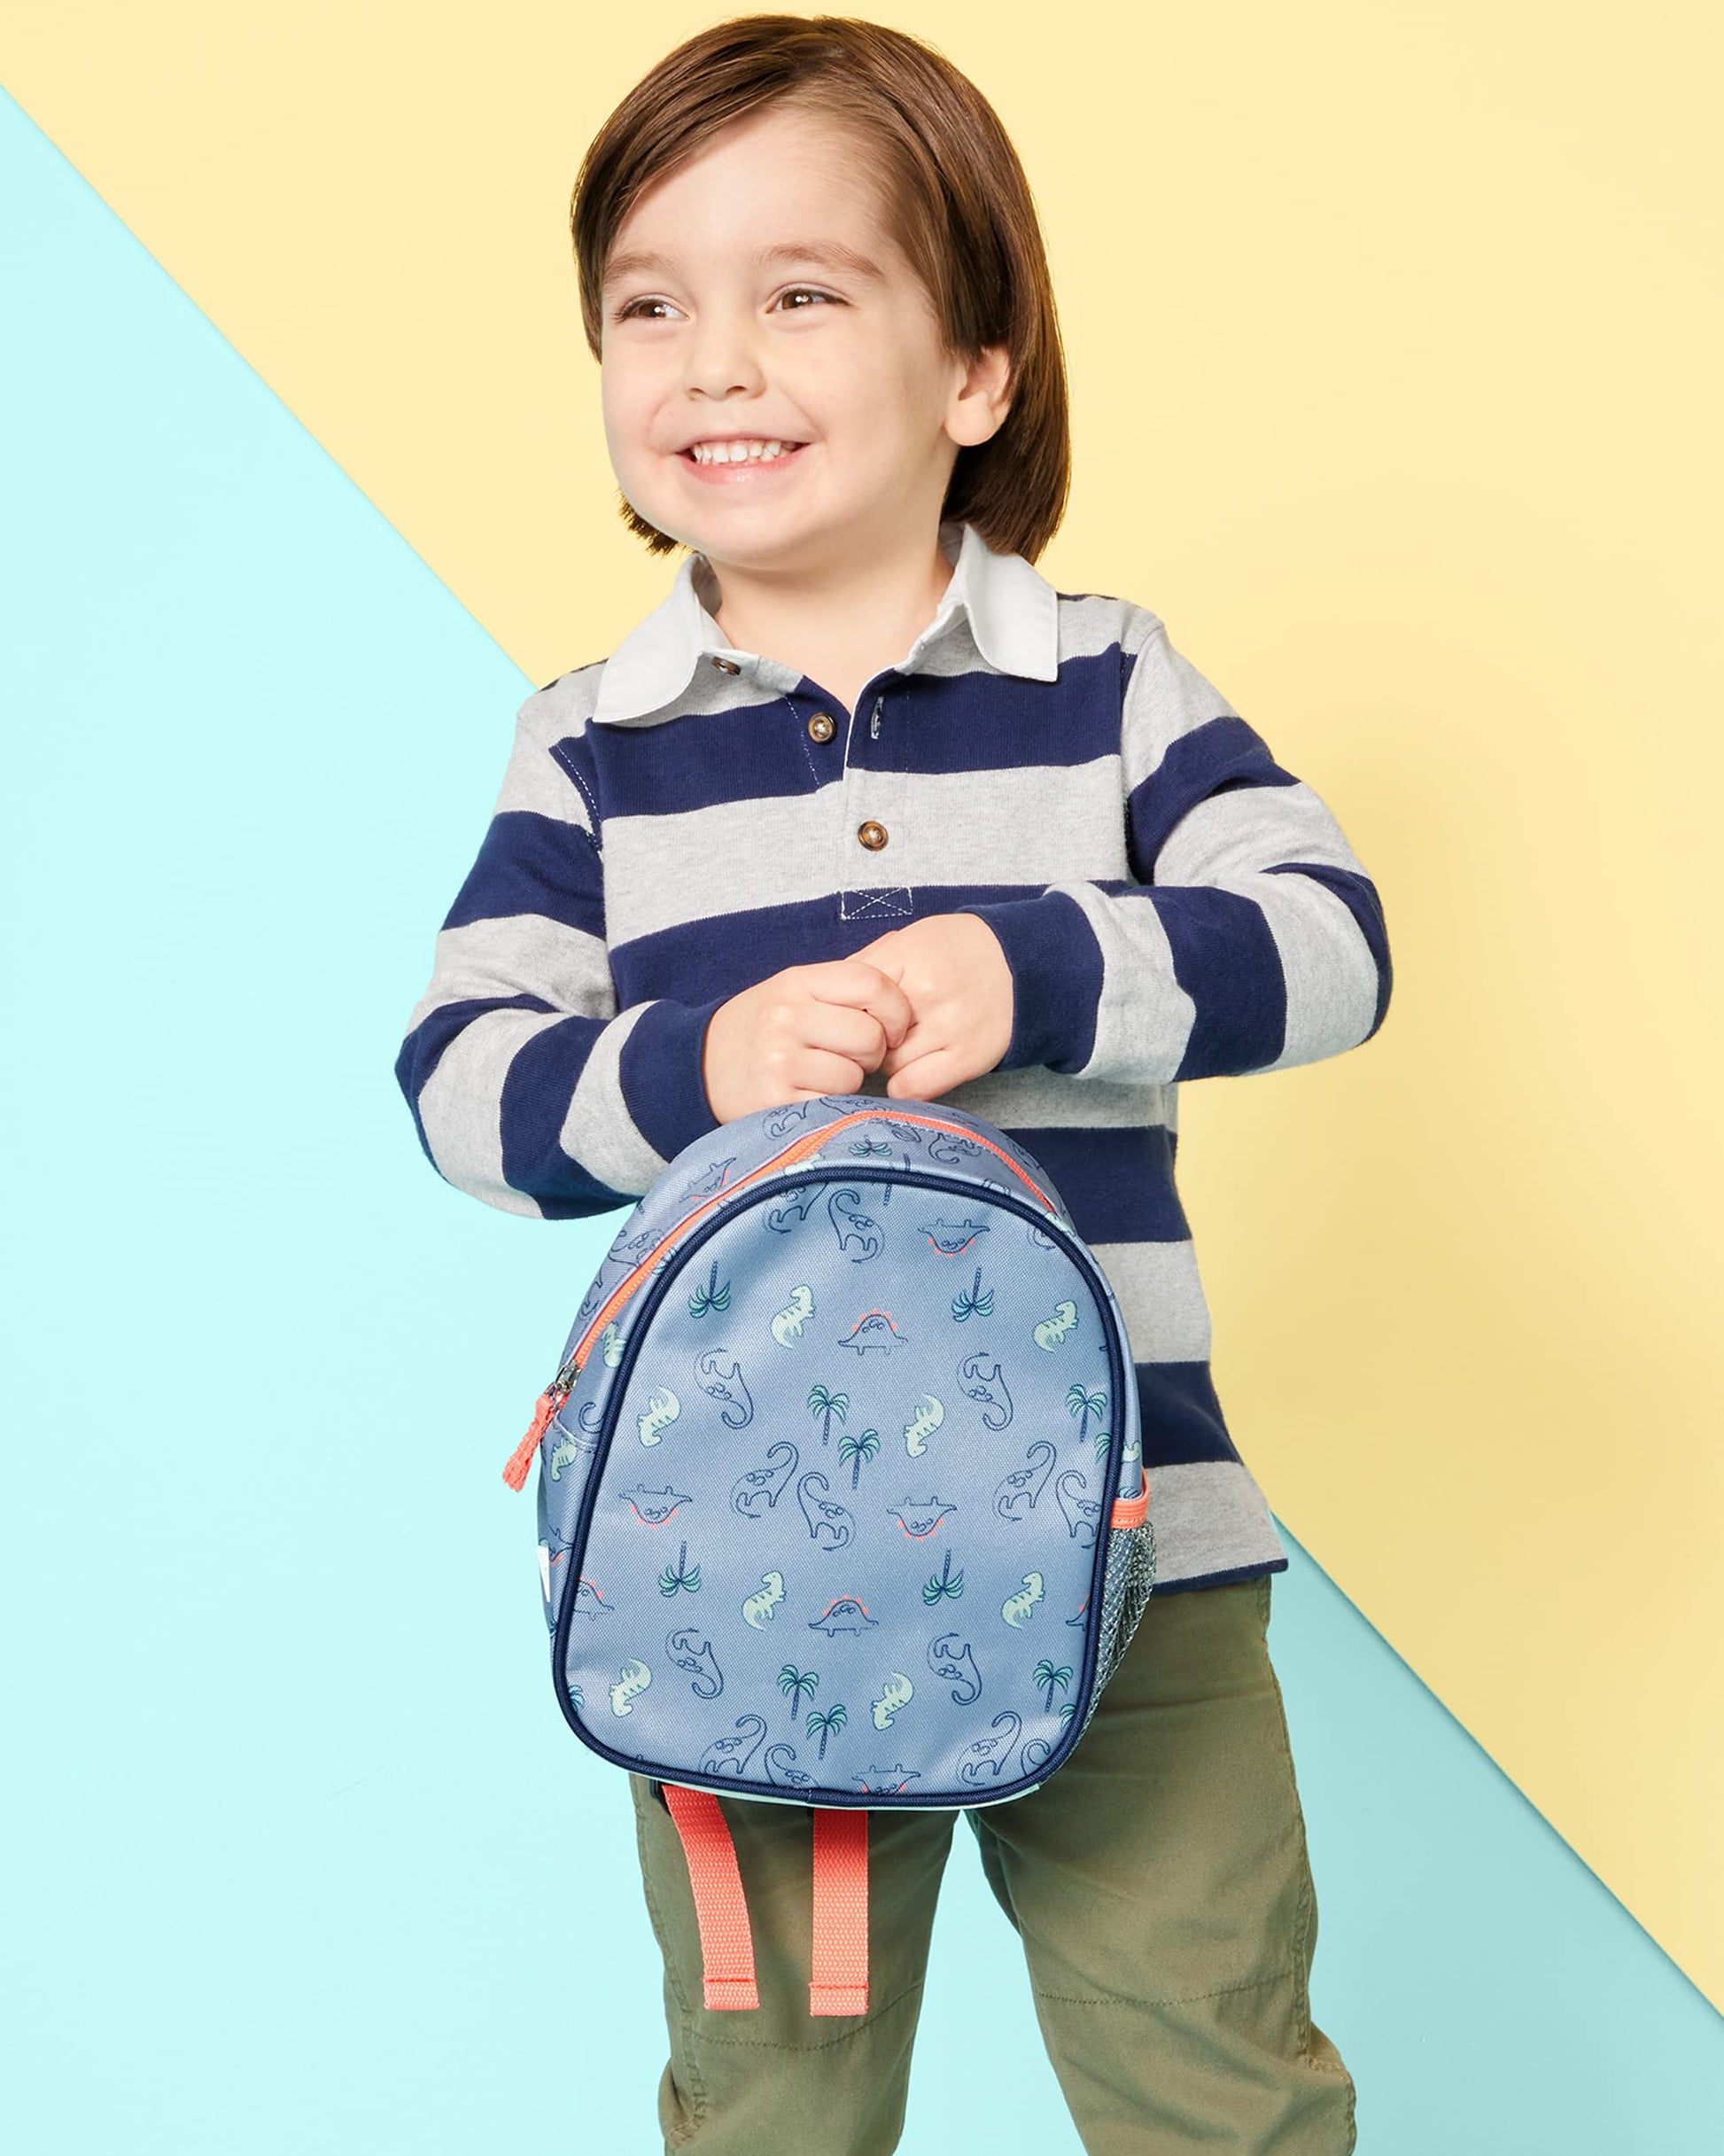 Simple Joys by Carter's Mini Backpack